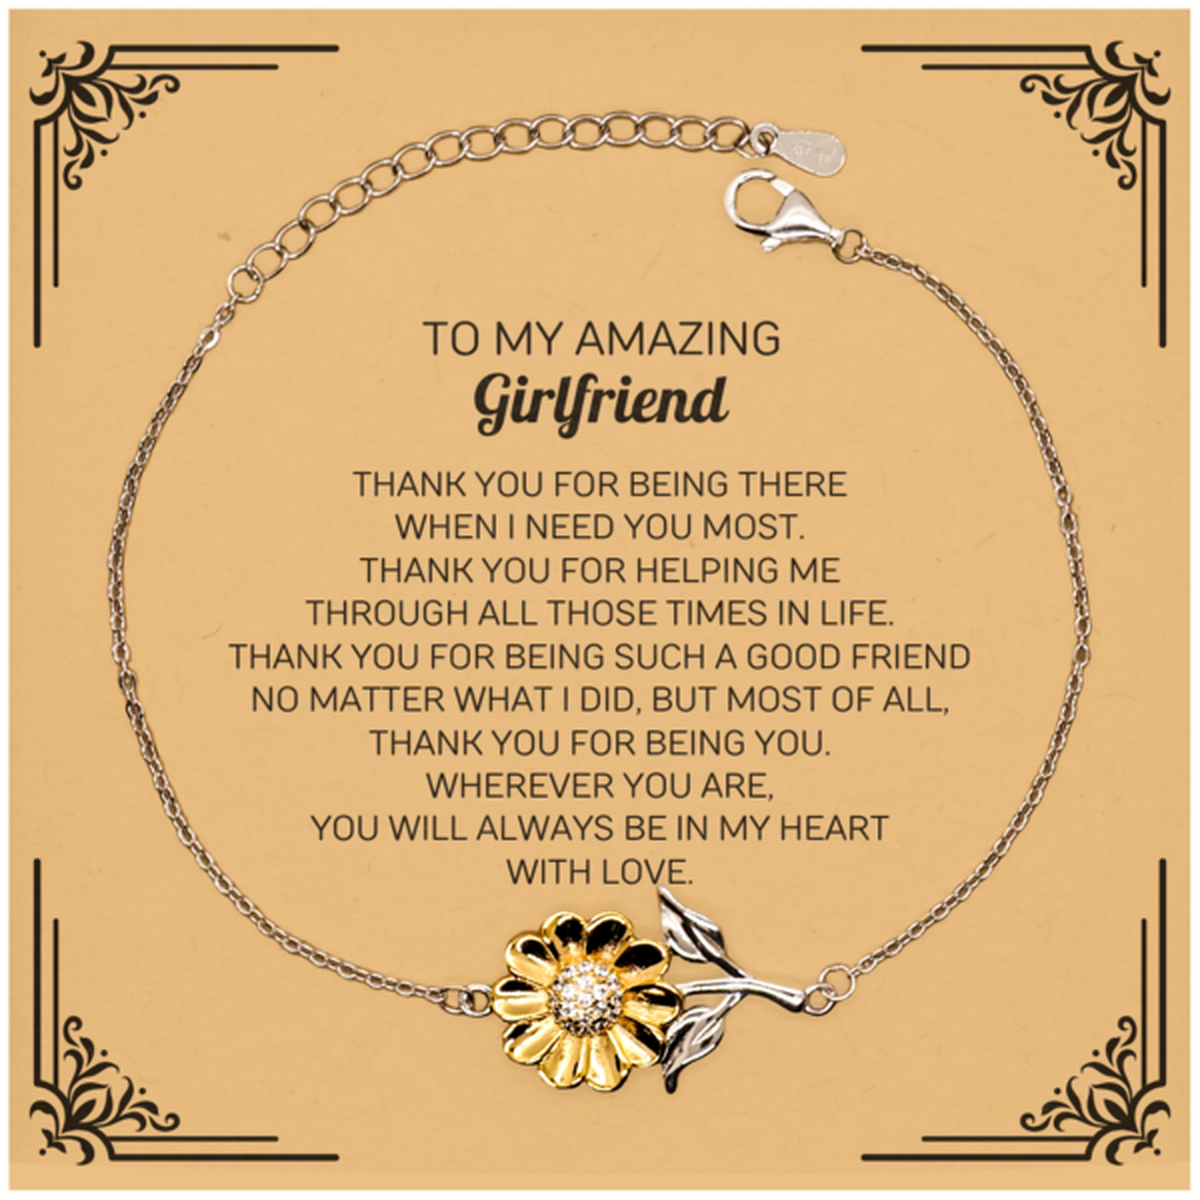 To My Amazing Girlfriend Sunflower Bracelet, Thank you for being there, Thank You Gifts For Girlfriend, Birthday, Christmas Unique Gifts For Girlfriend